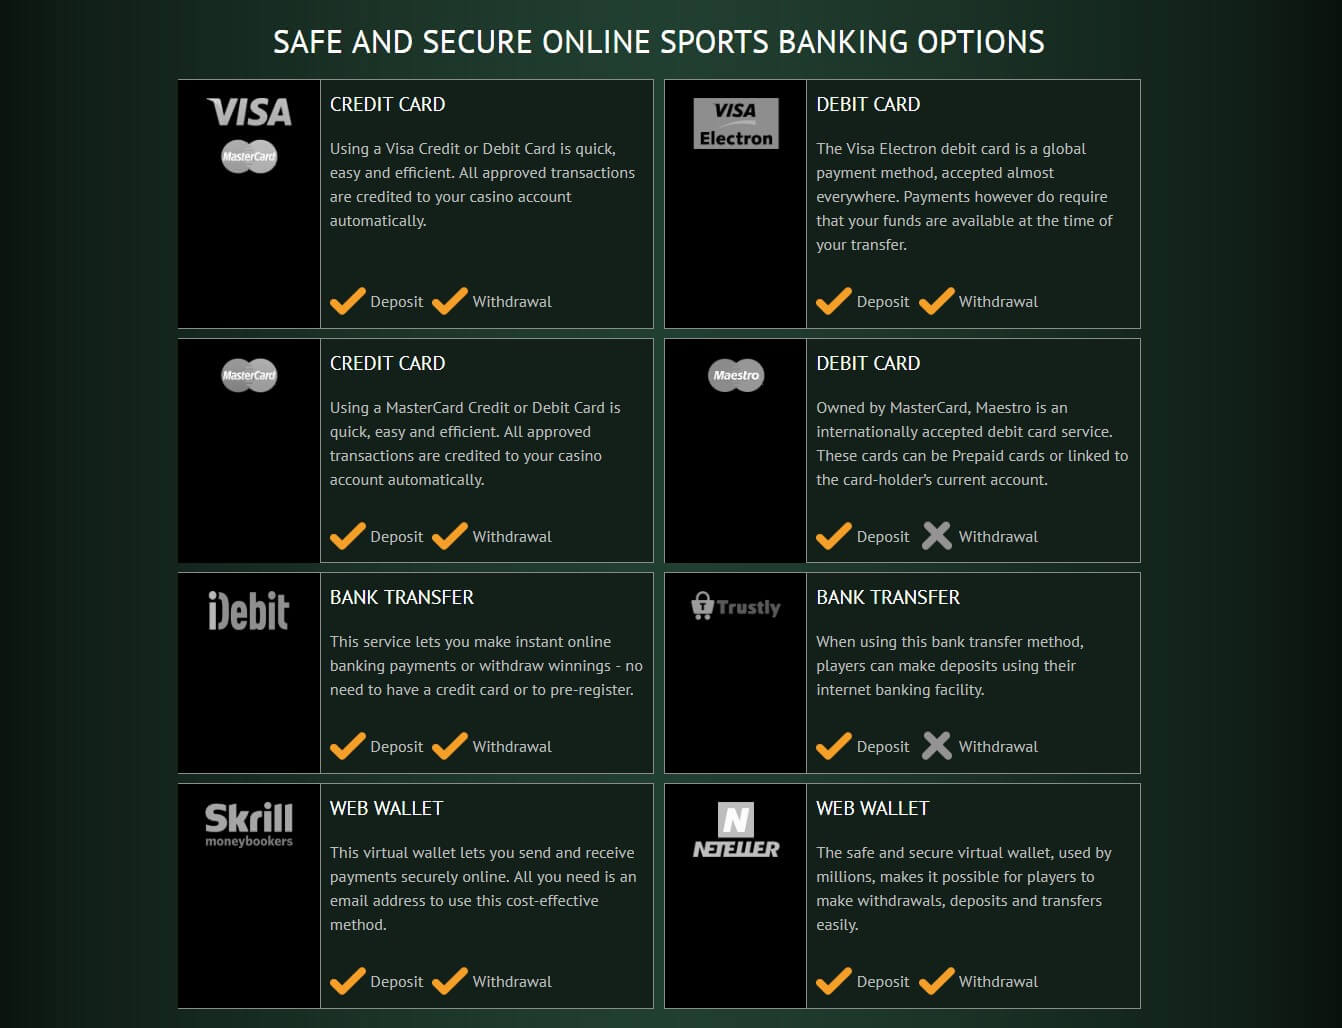 Available banking options at Spin Palace Sports